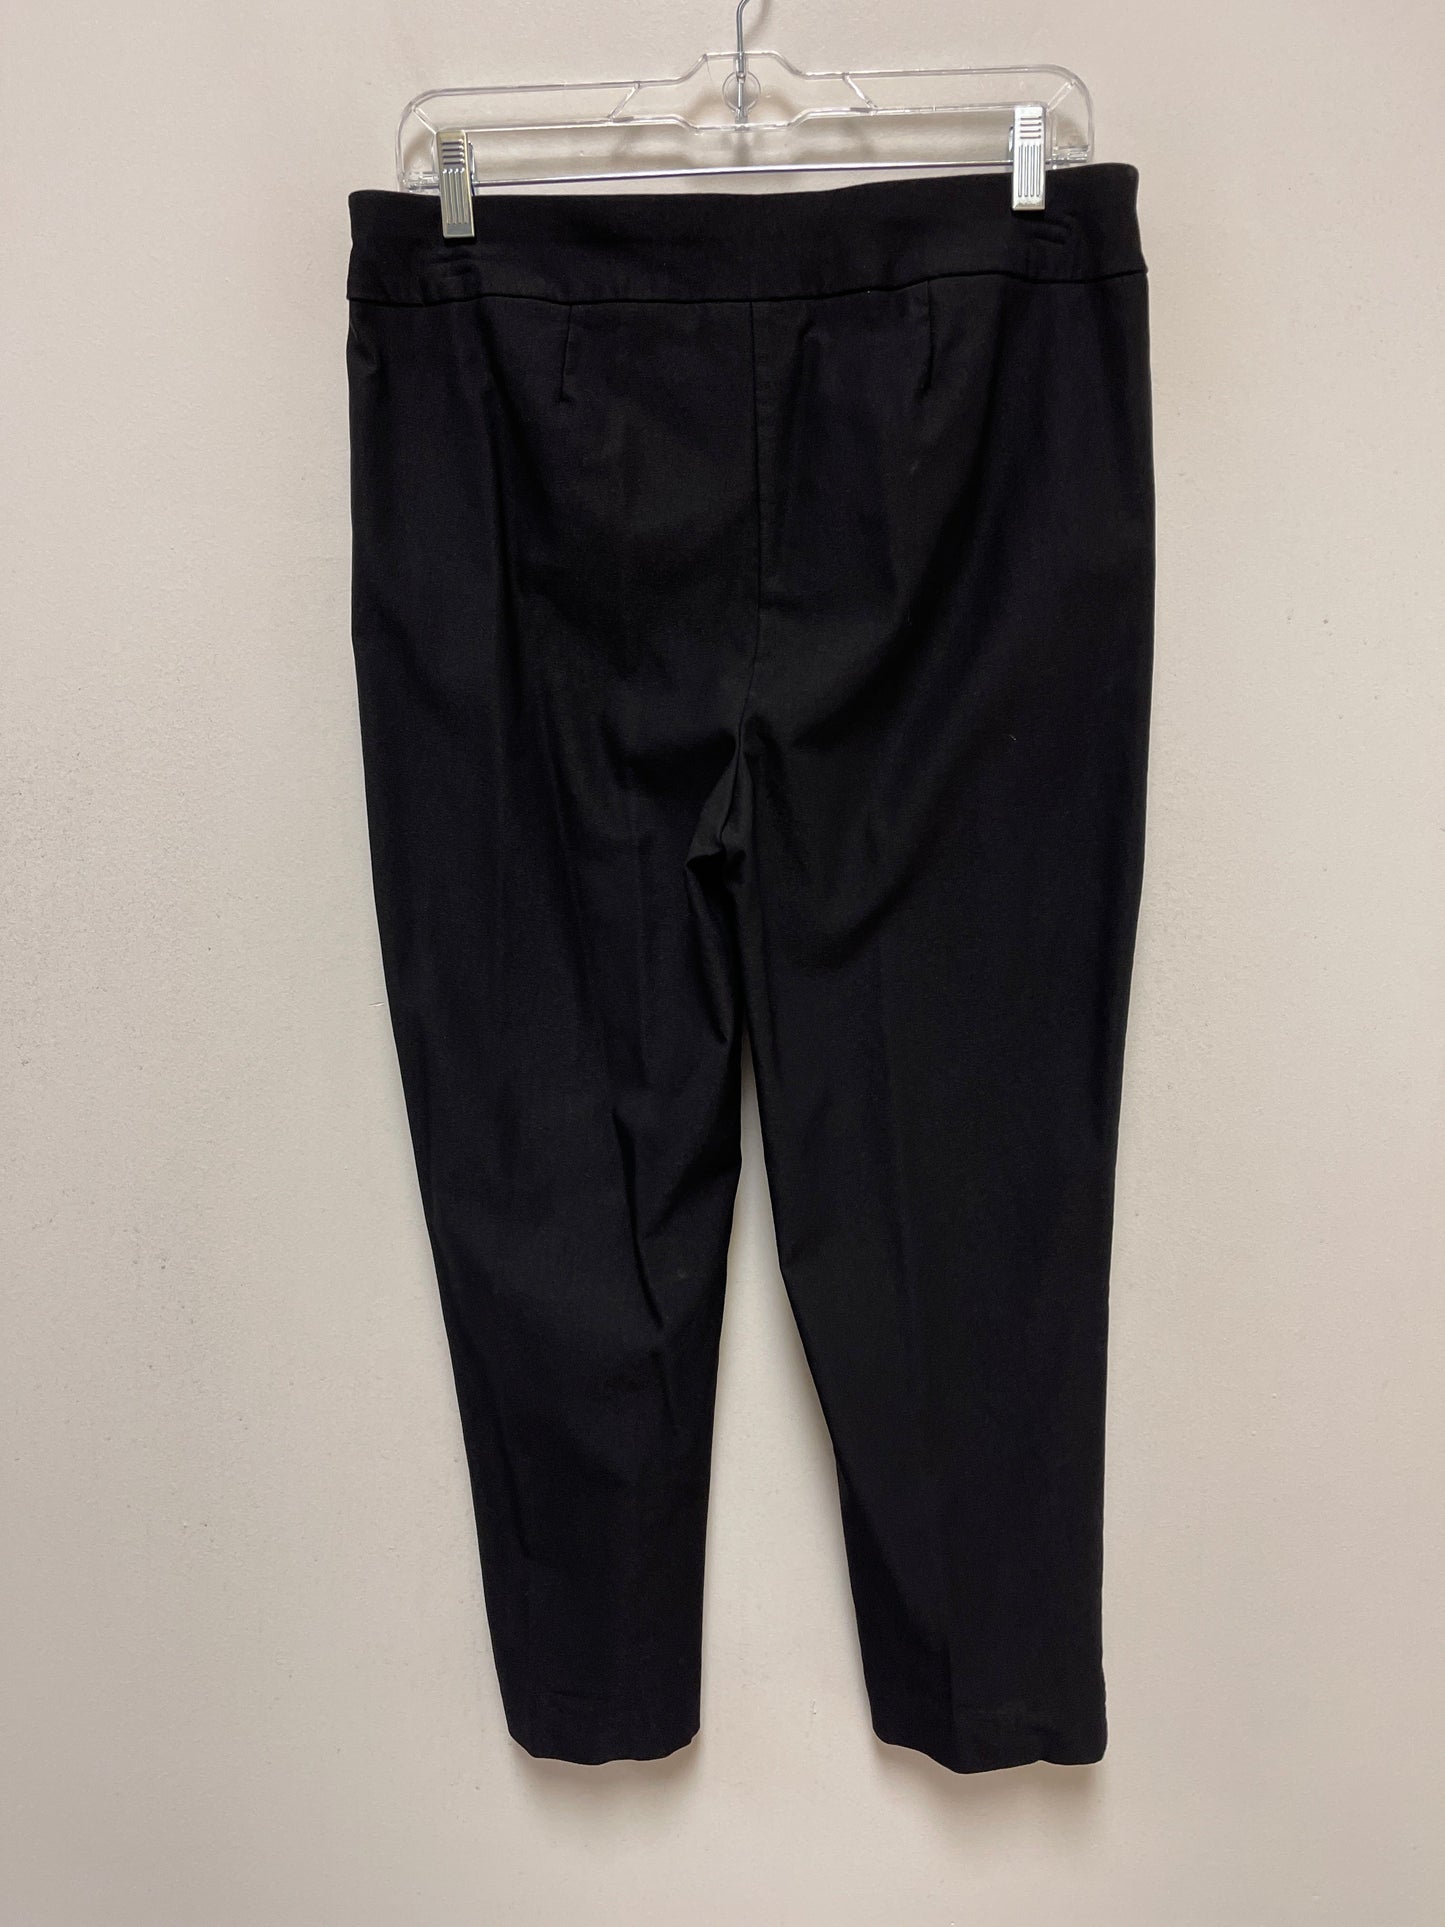 Black Pants Other Chicos, Size 8